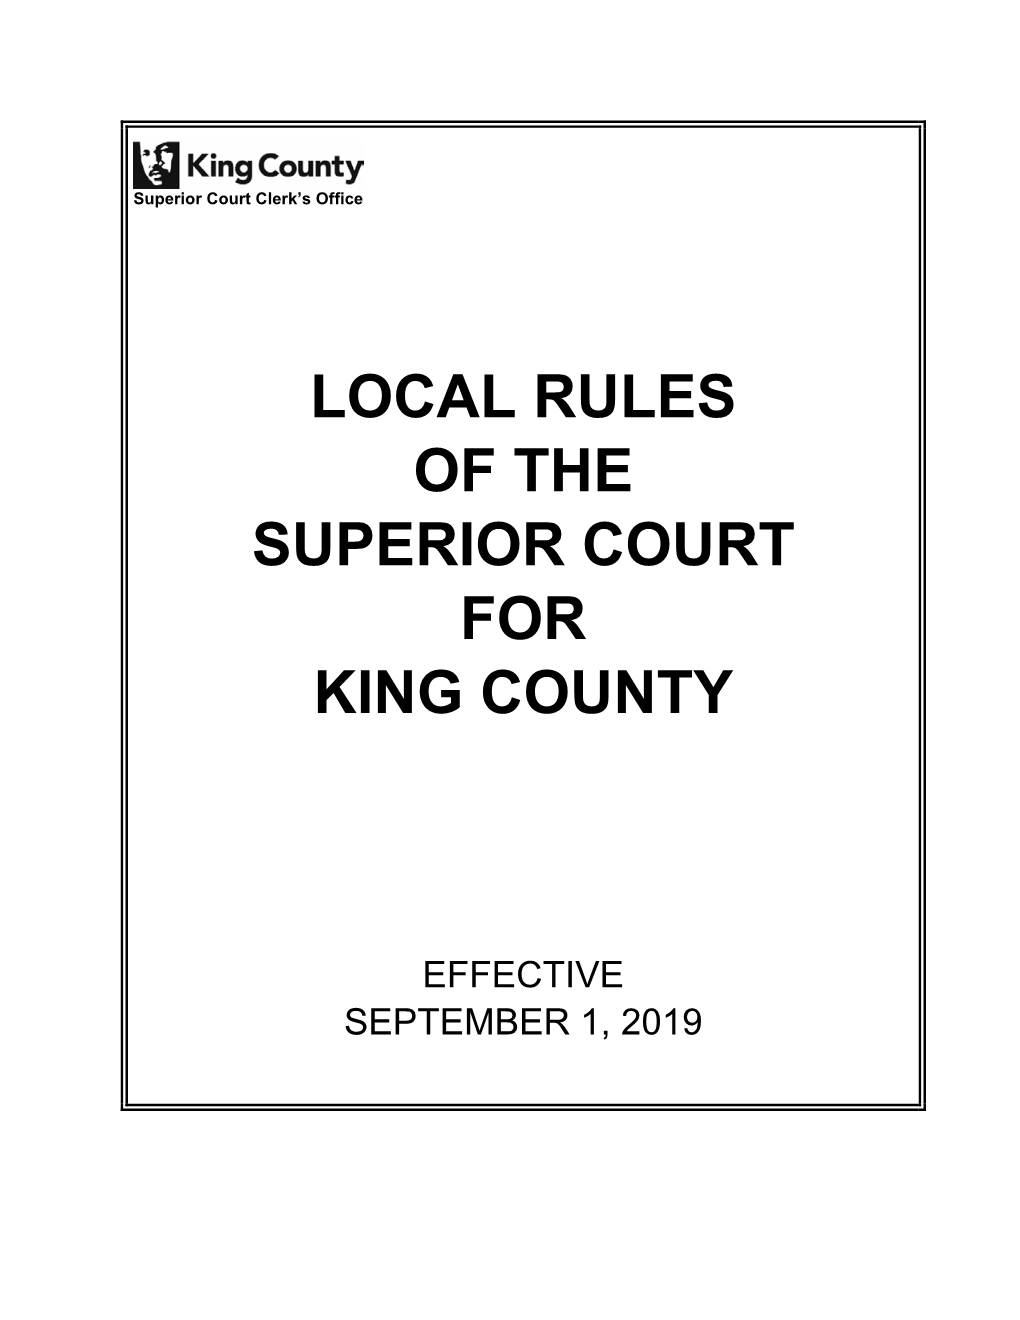 Local Rules of the Superior Court for King County